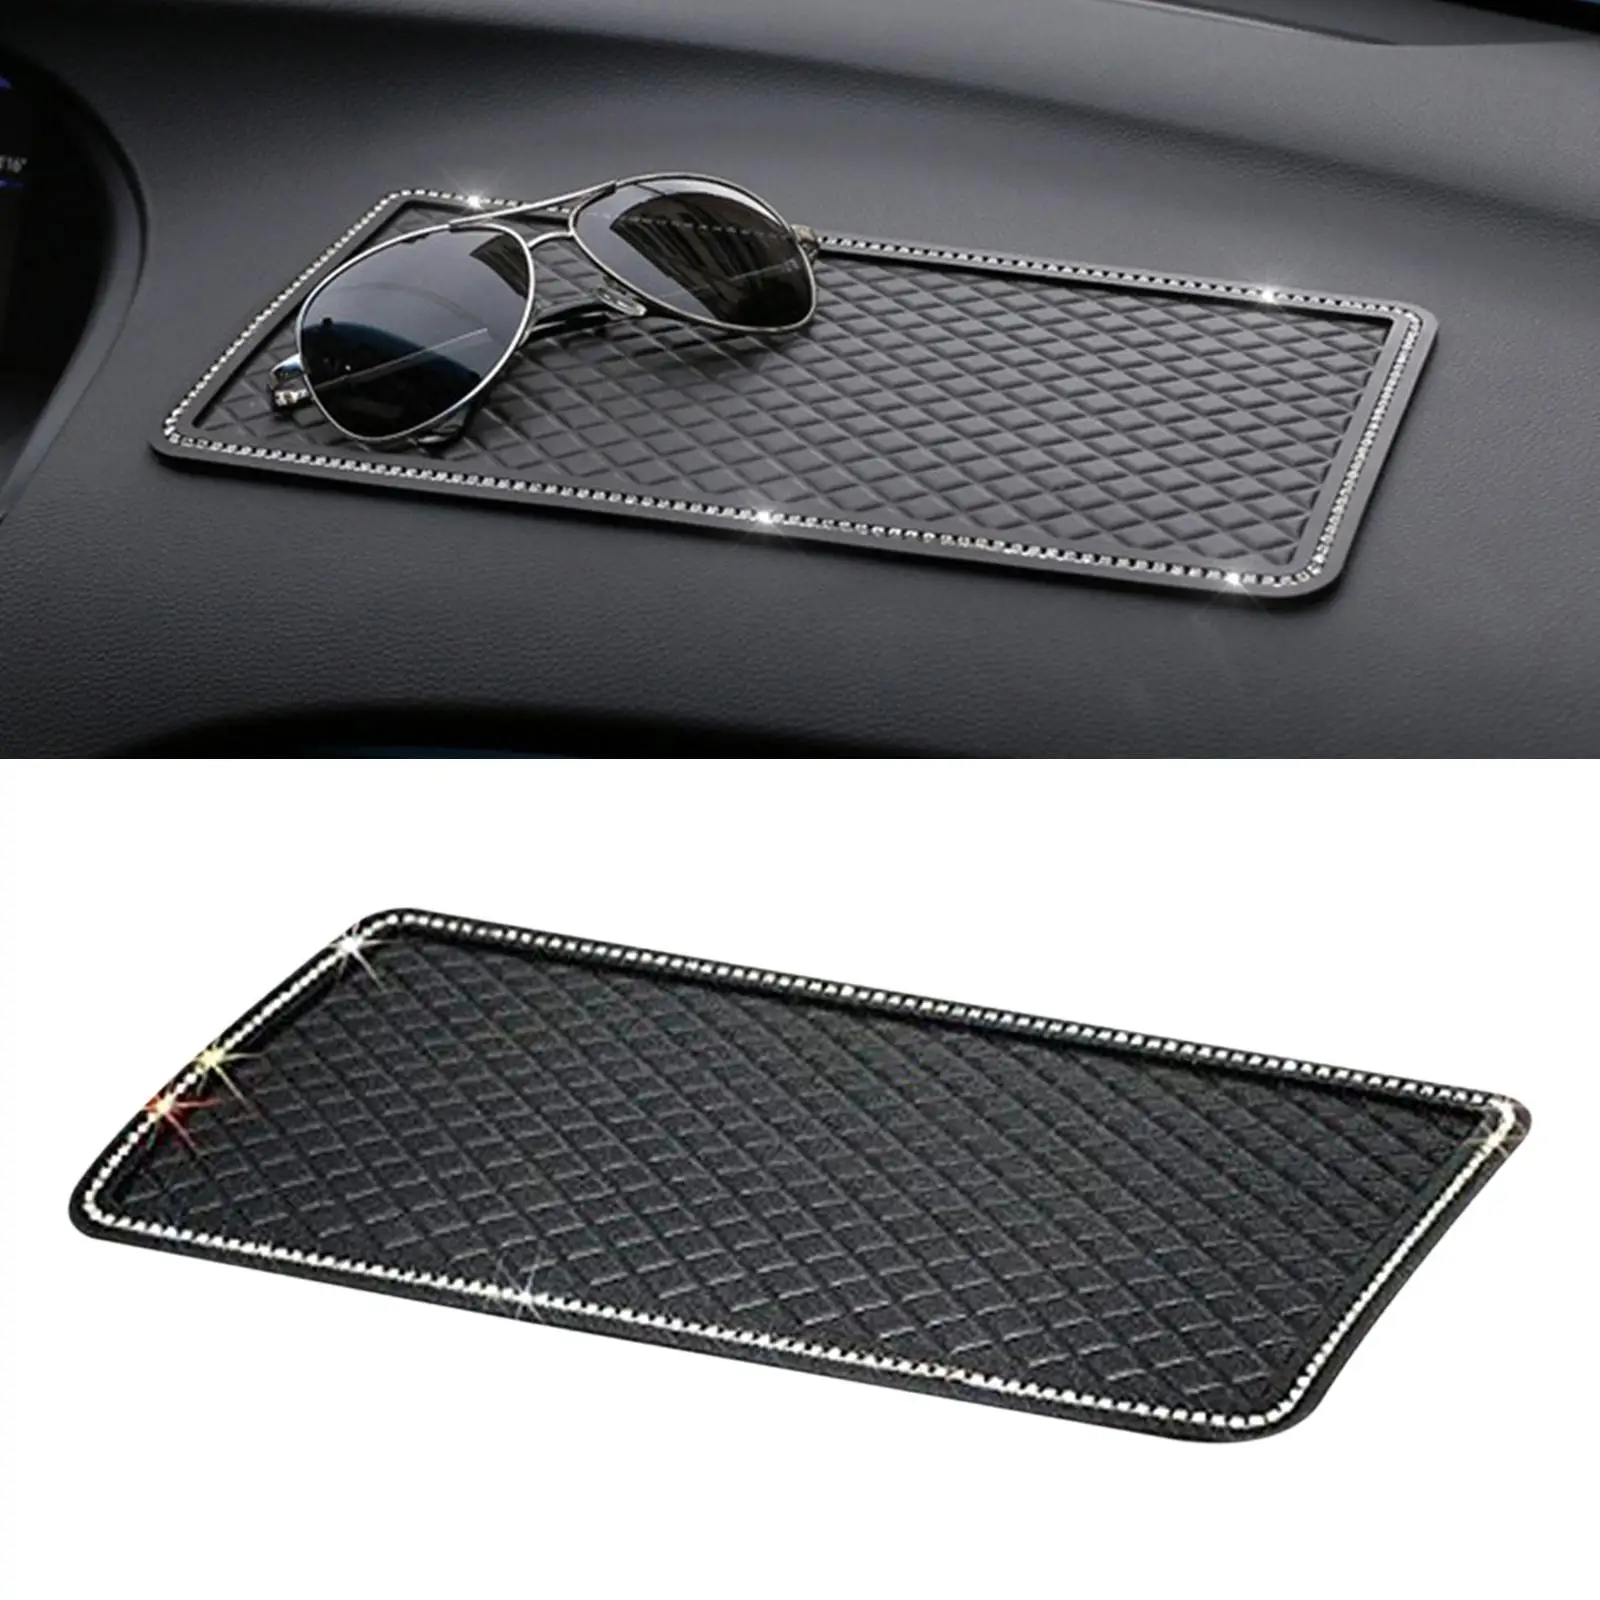 Universal Car Anti Slip Sticky Dashboard Pad Removable Gripping Pad Non Slip Mat for Electronic Devices Keys